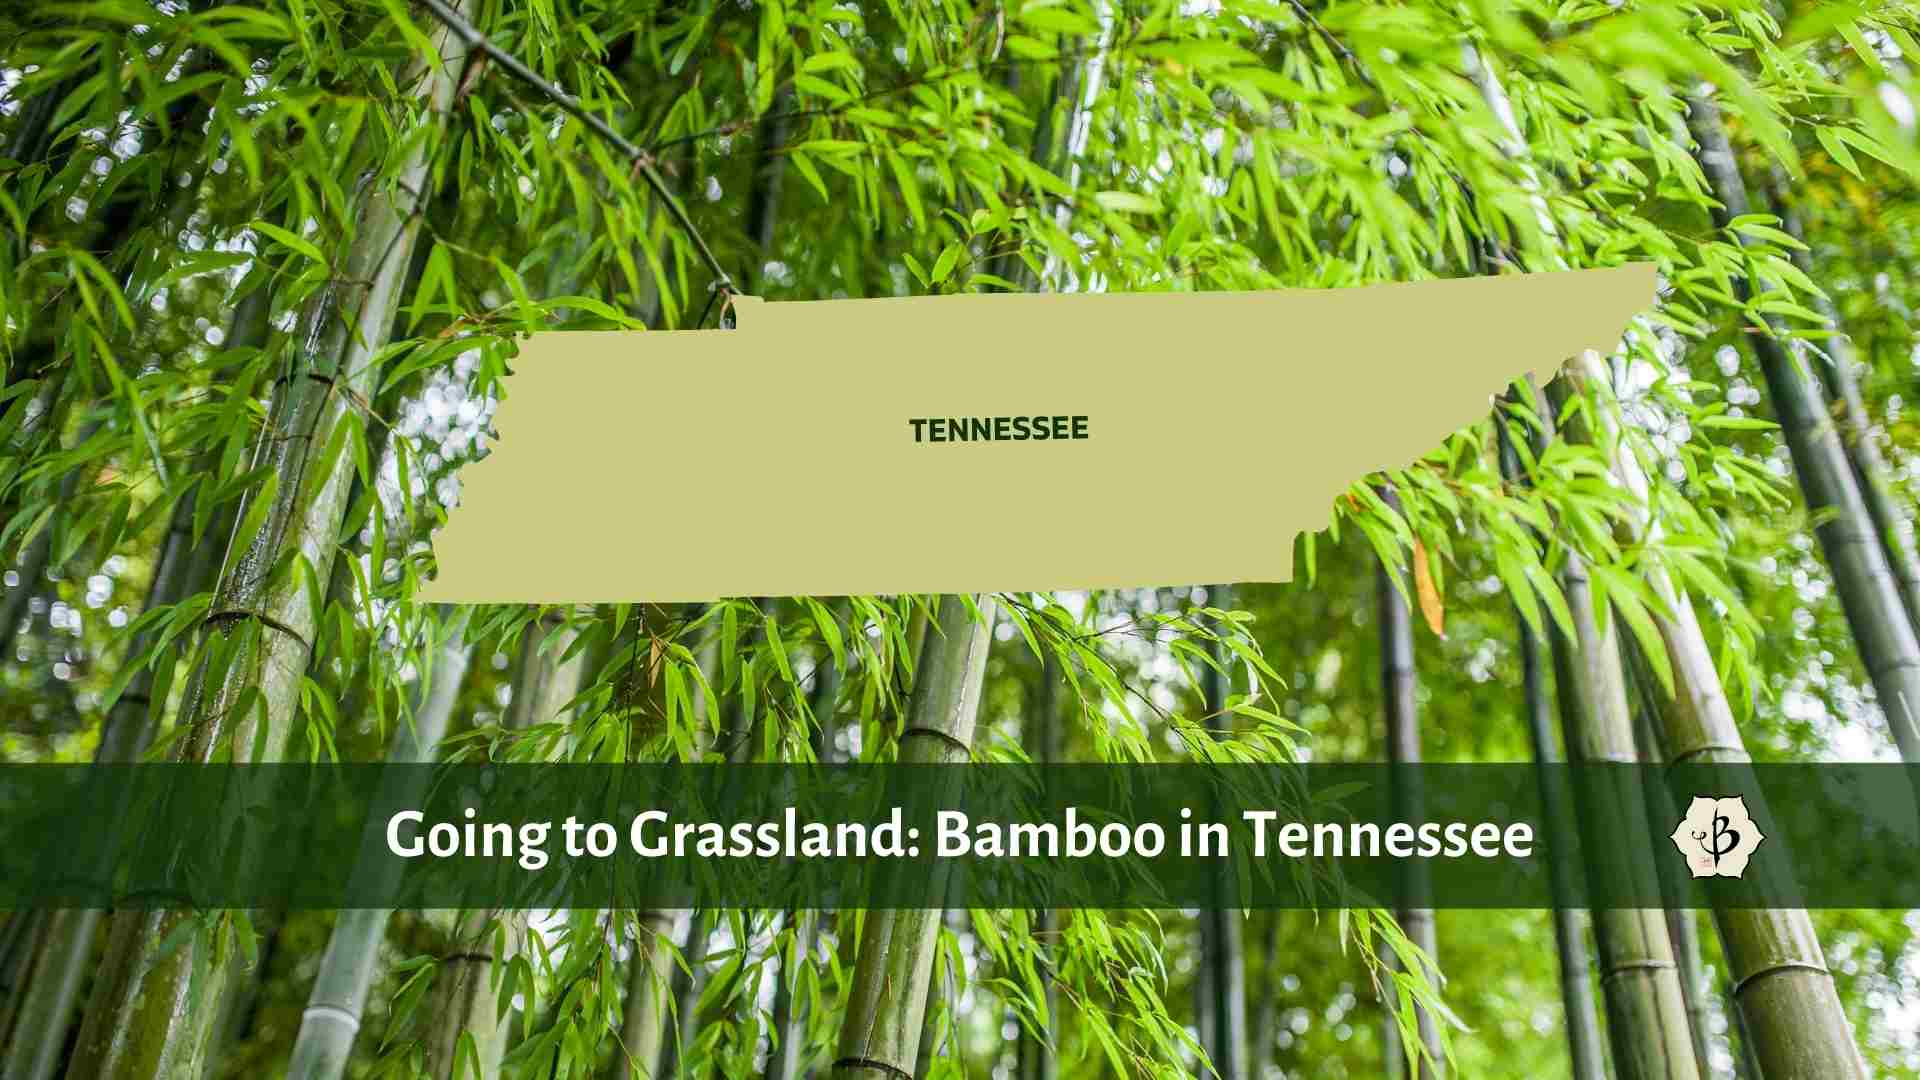 Bamboo in Tennessee